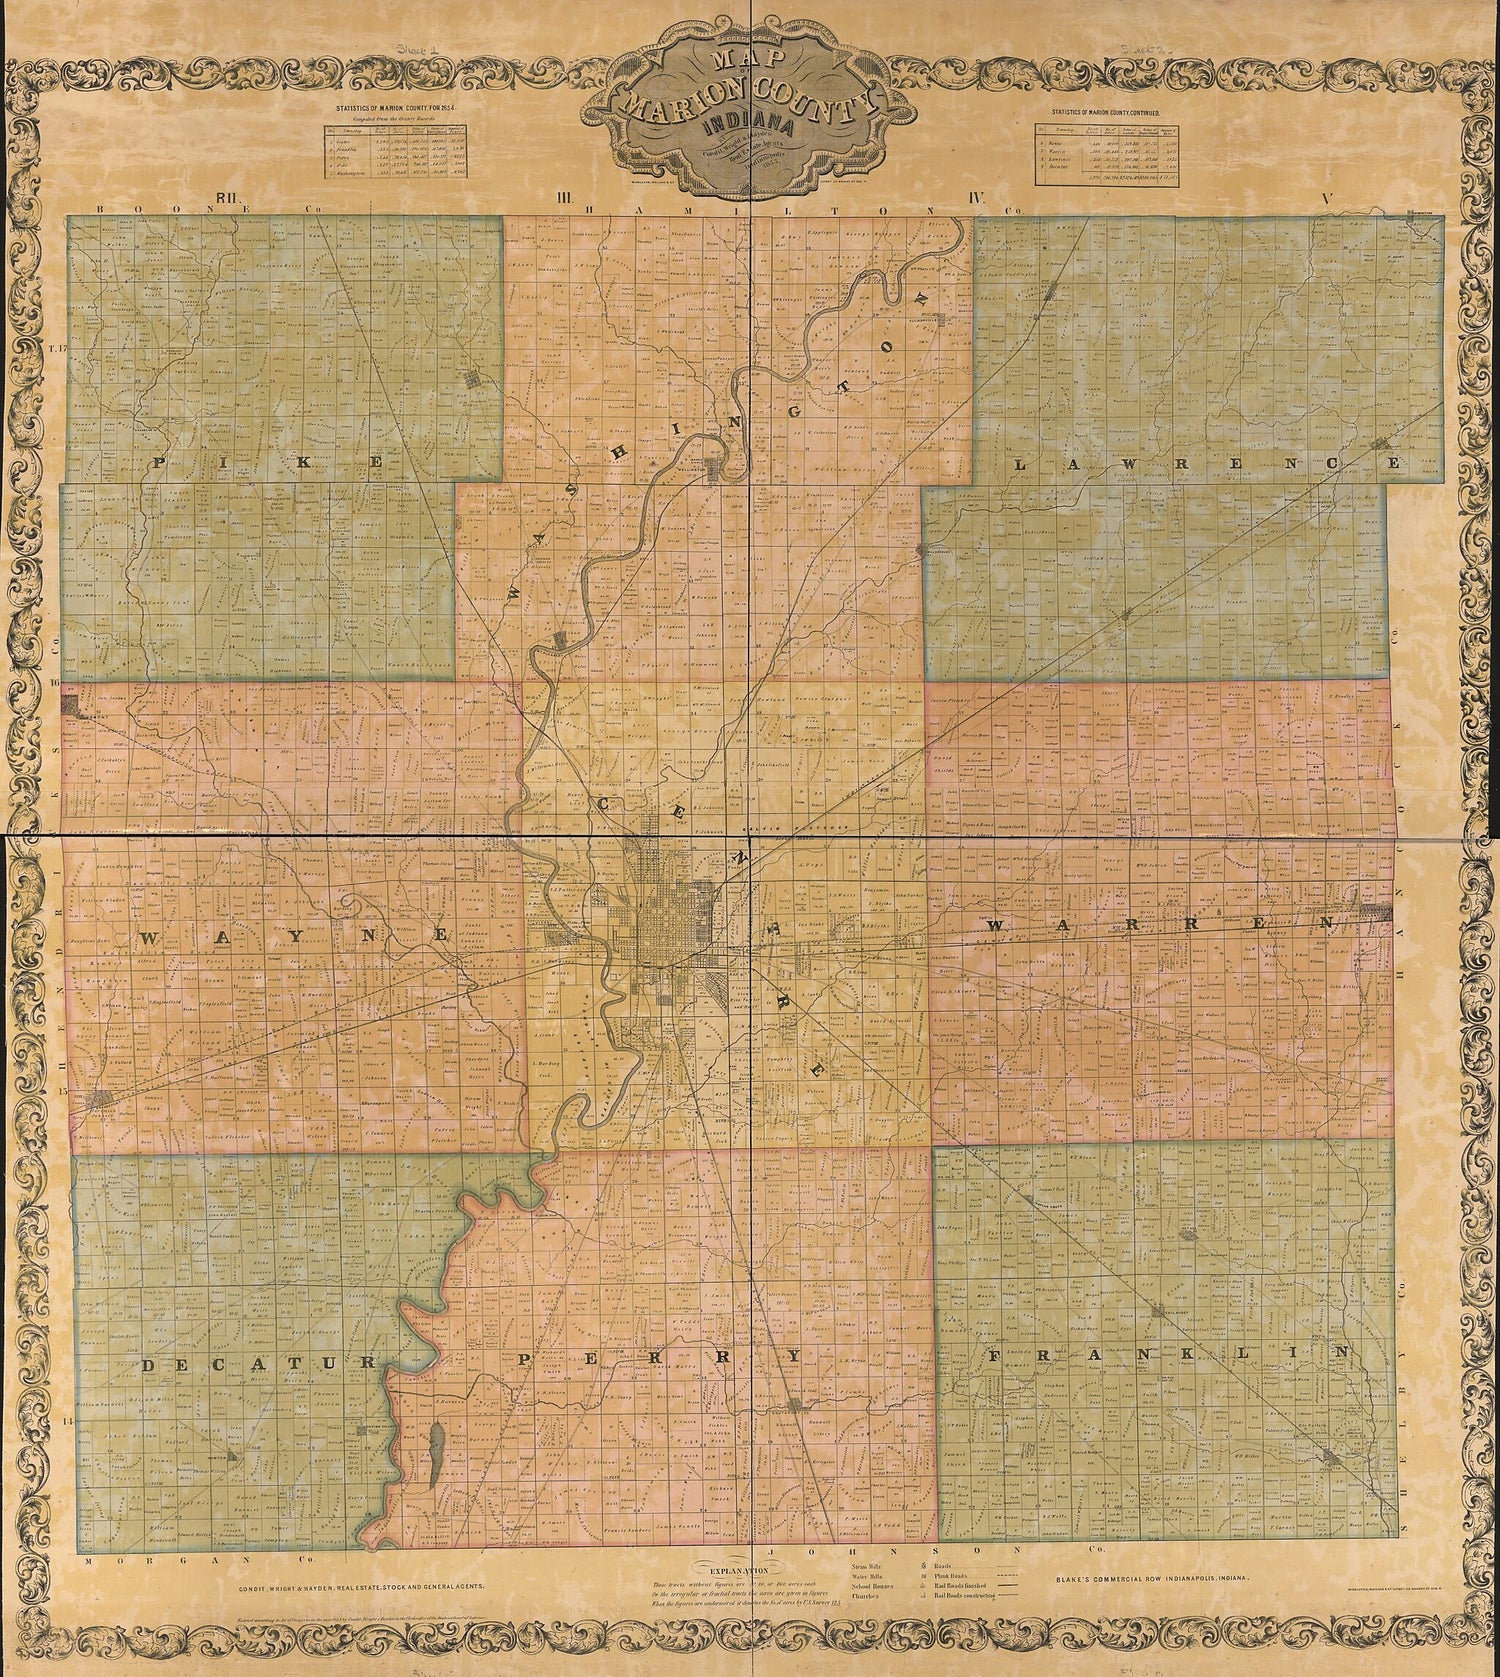 This old map of Map of Marion County, Indiana from 1855 was created by Wright &amp; Hayden Condit in 1855